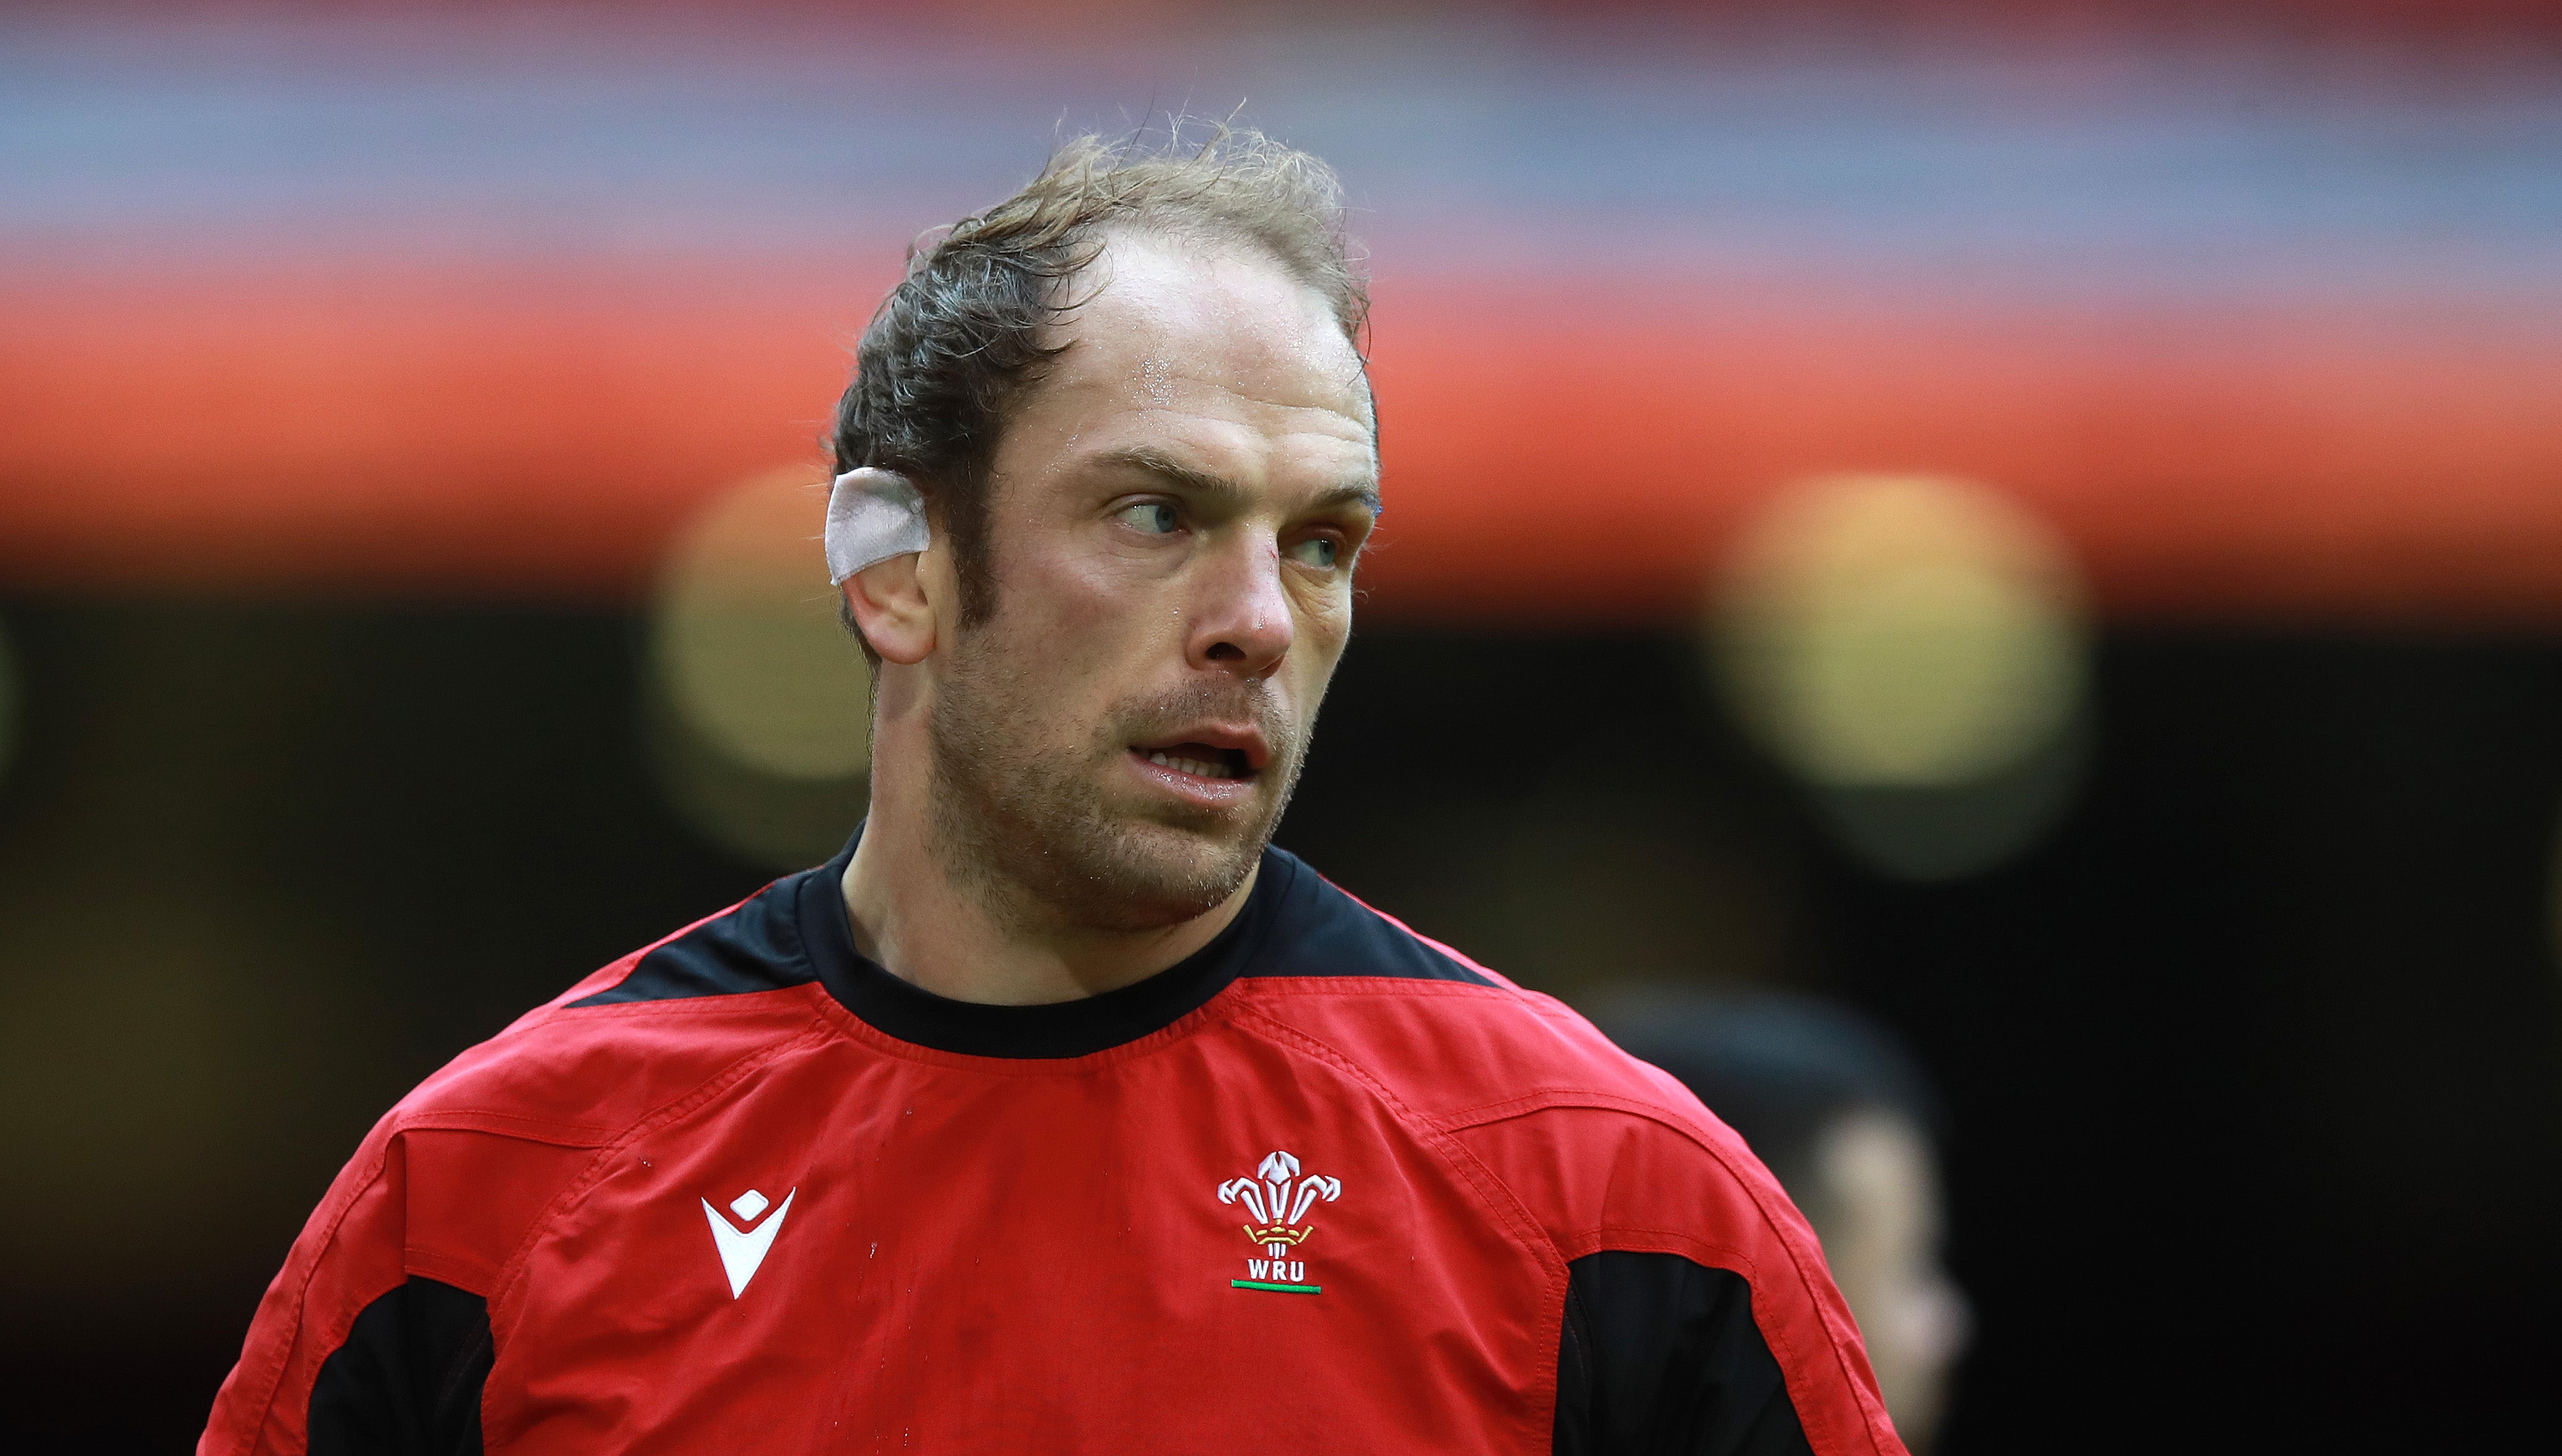 Alun Wyn Jones’ black eye was visible during the Six Nations